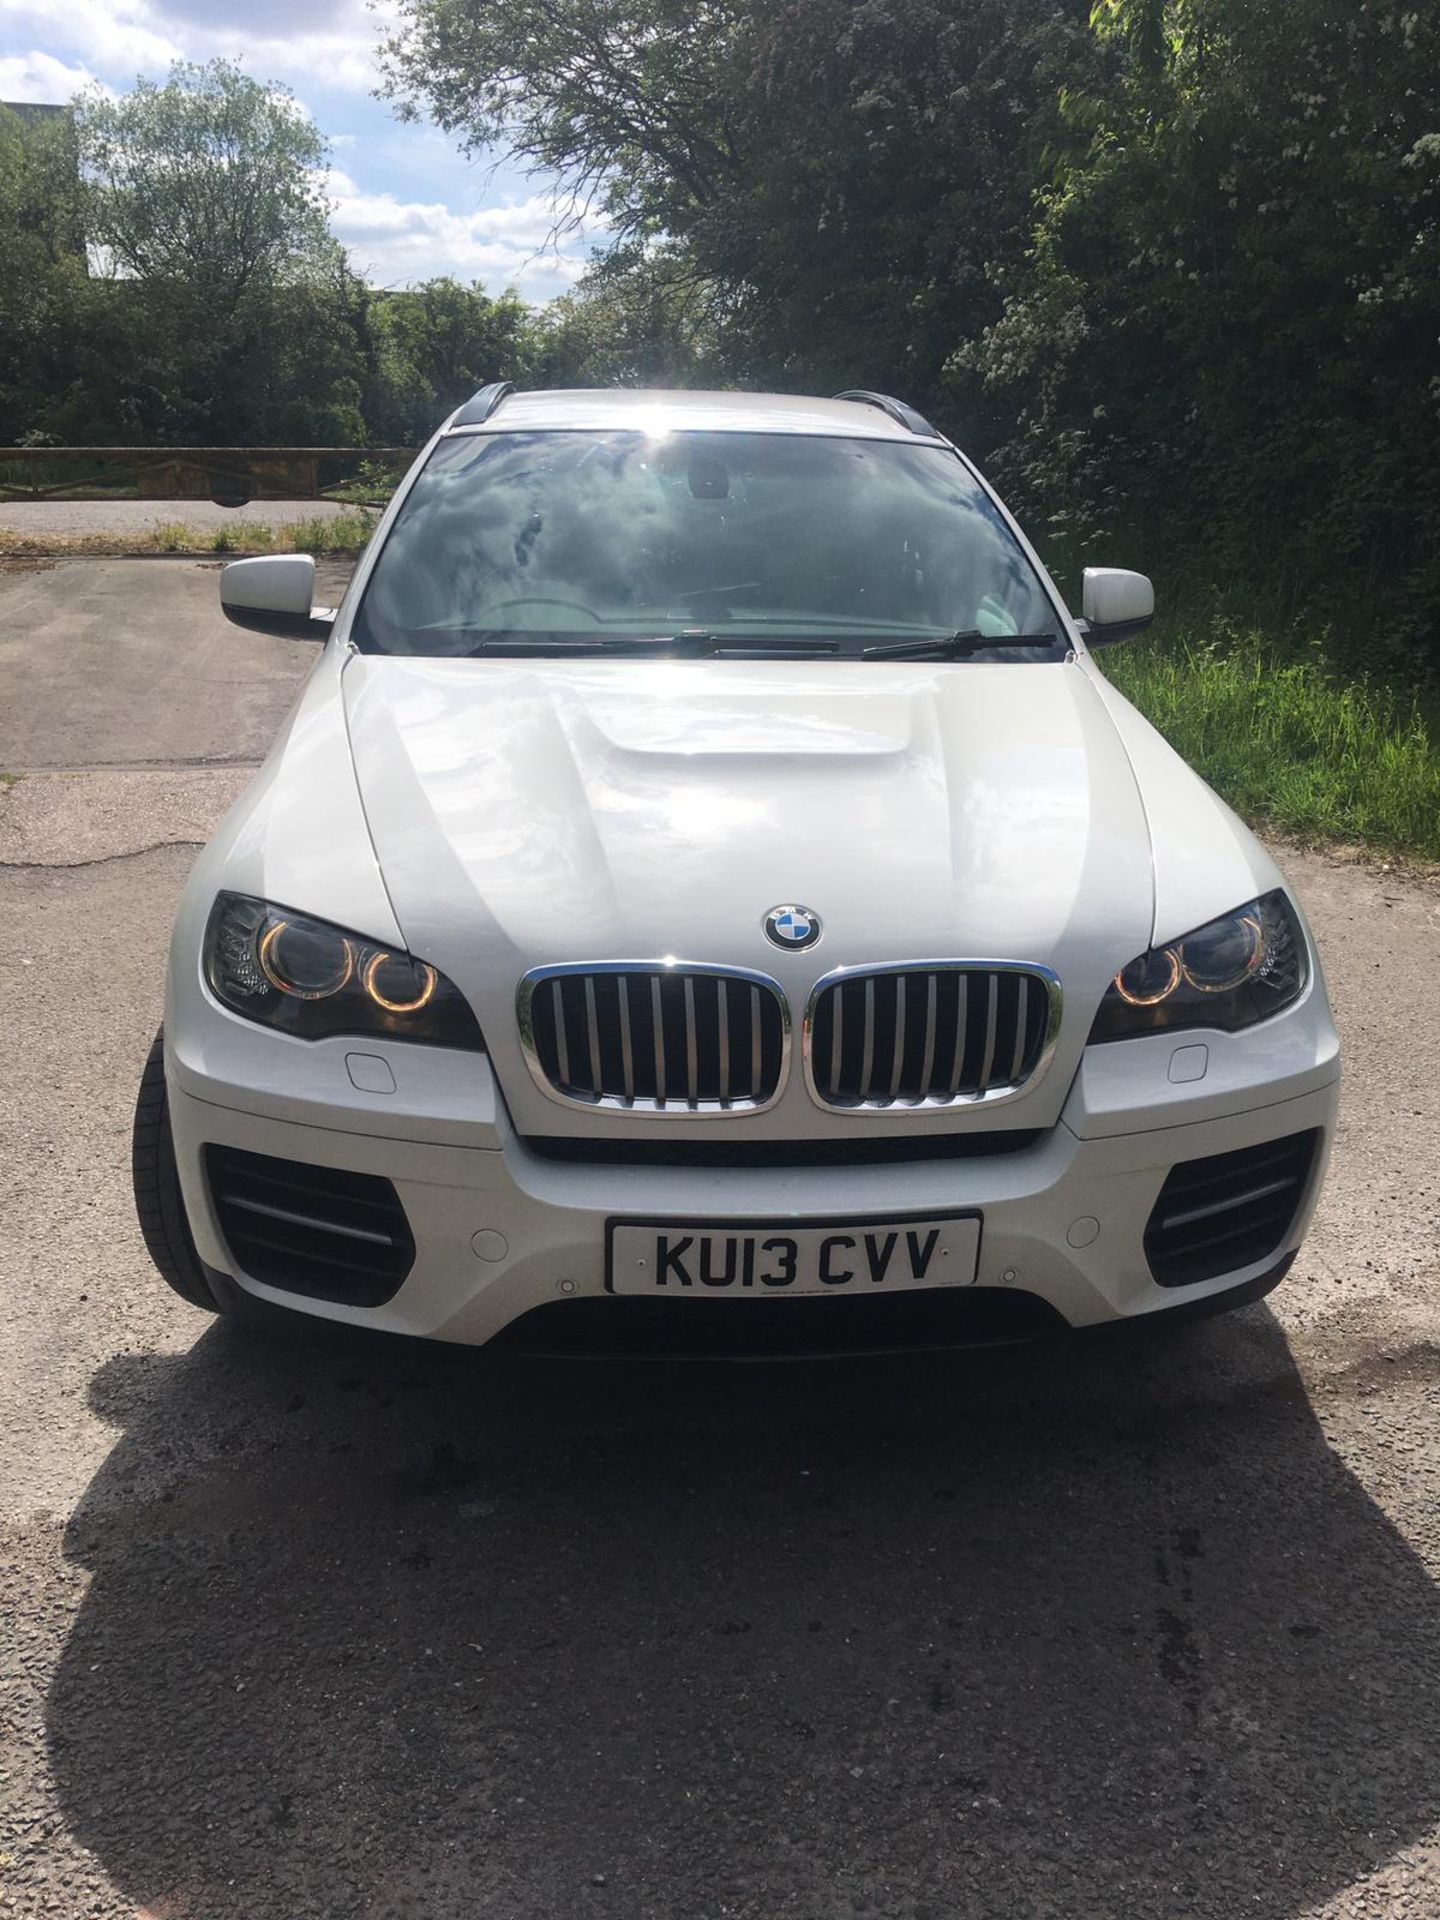 2013/13 REG BMW X6 M50D AUTOMATIC 3.0 DIESEL WHITE, SHOWING 1 FORMER KEEPER *NO VAT* - Image 2 of 41